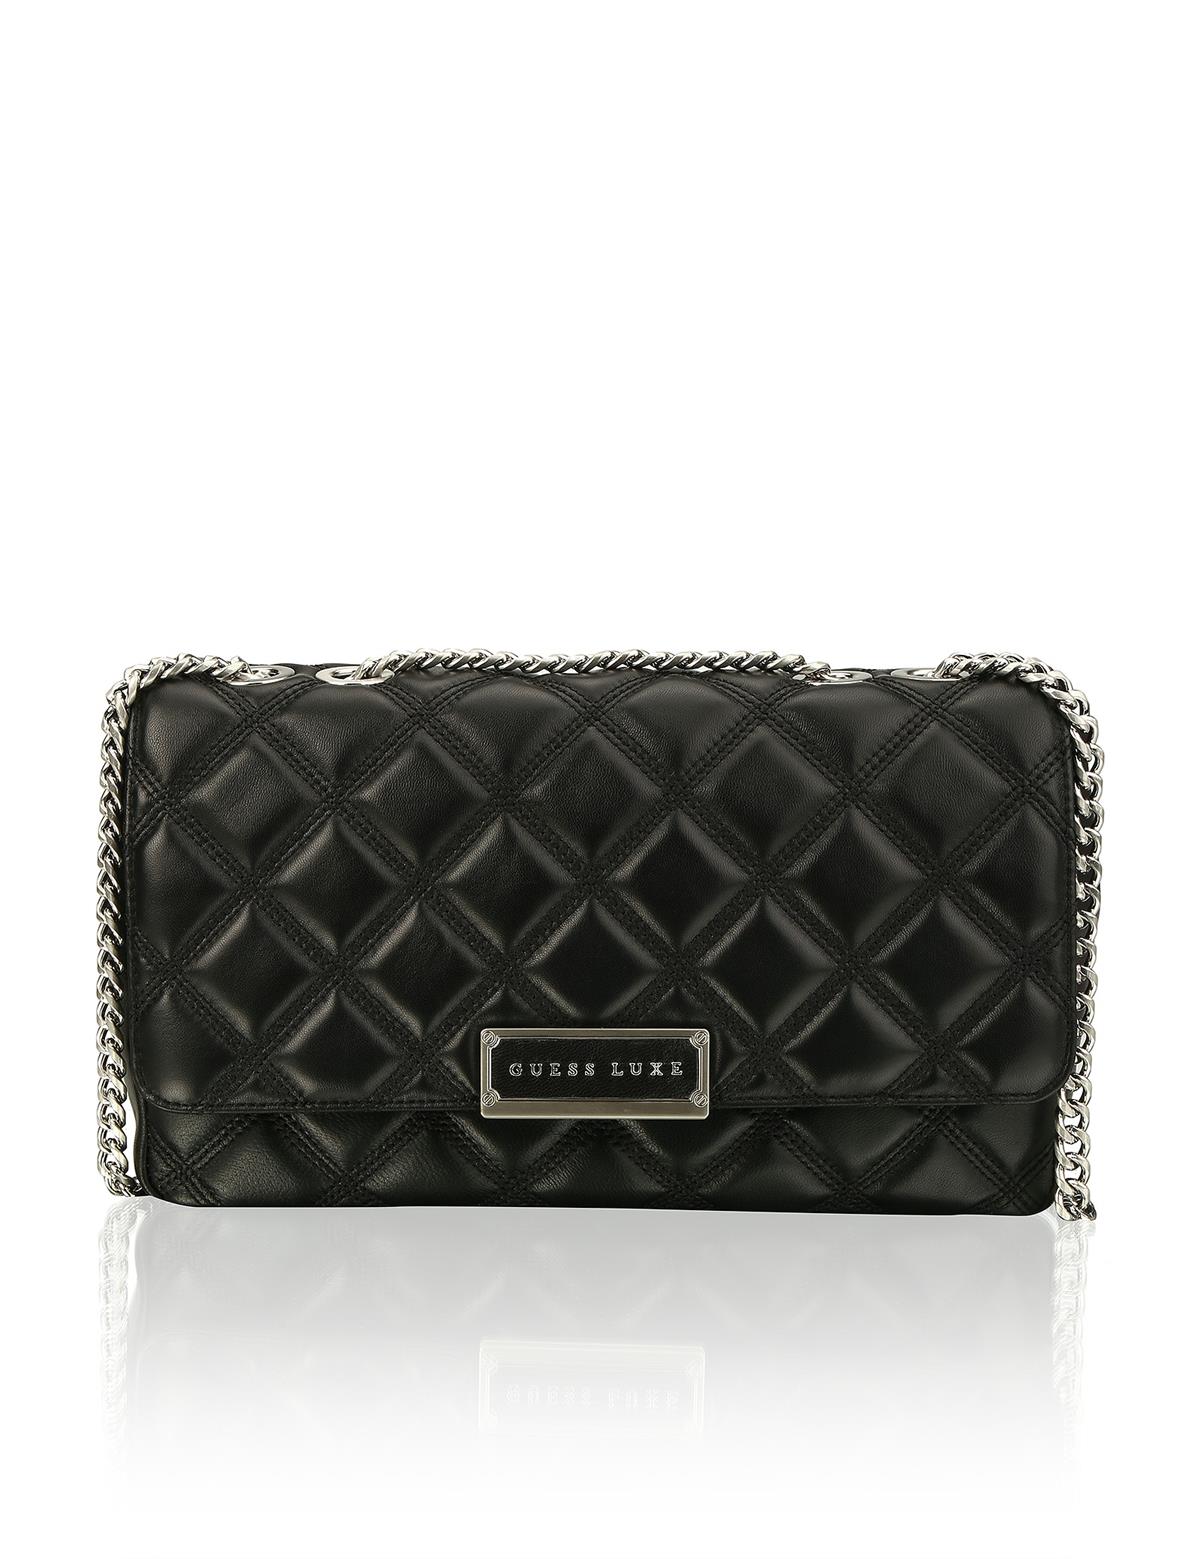 HUMANIC 24 Guess Luxe Glattleder Quilted Bag EUR 185 6131001740